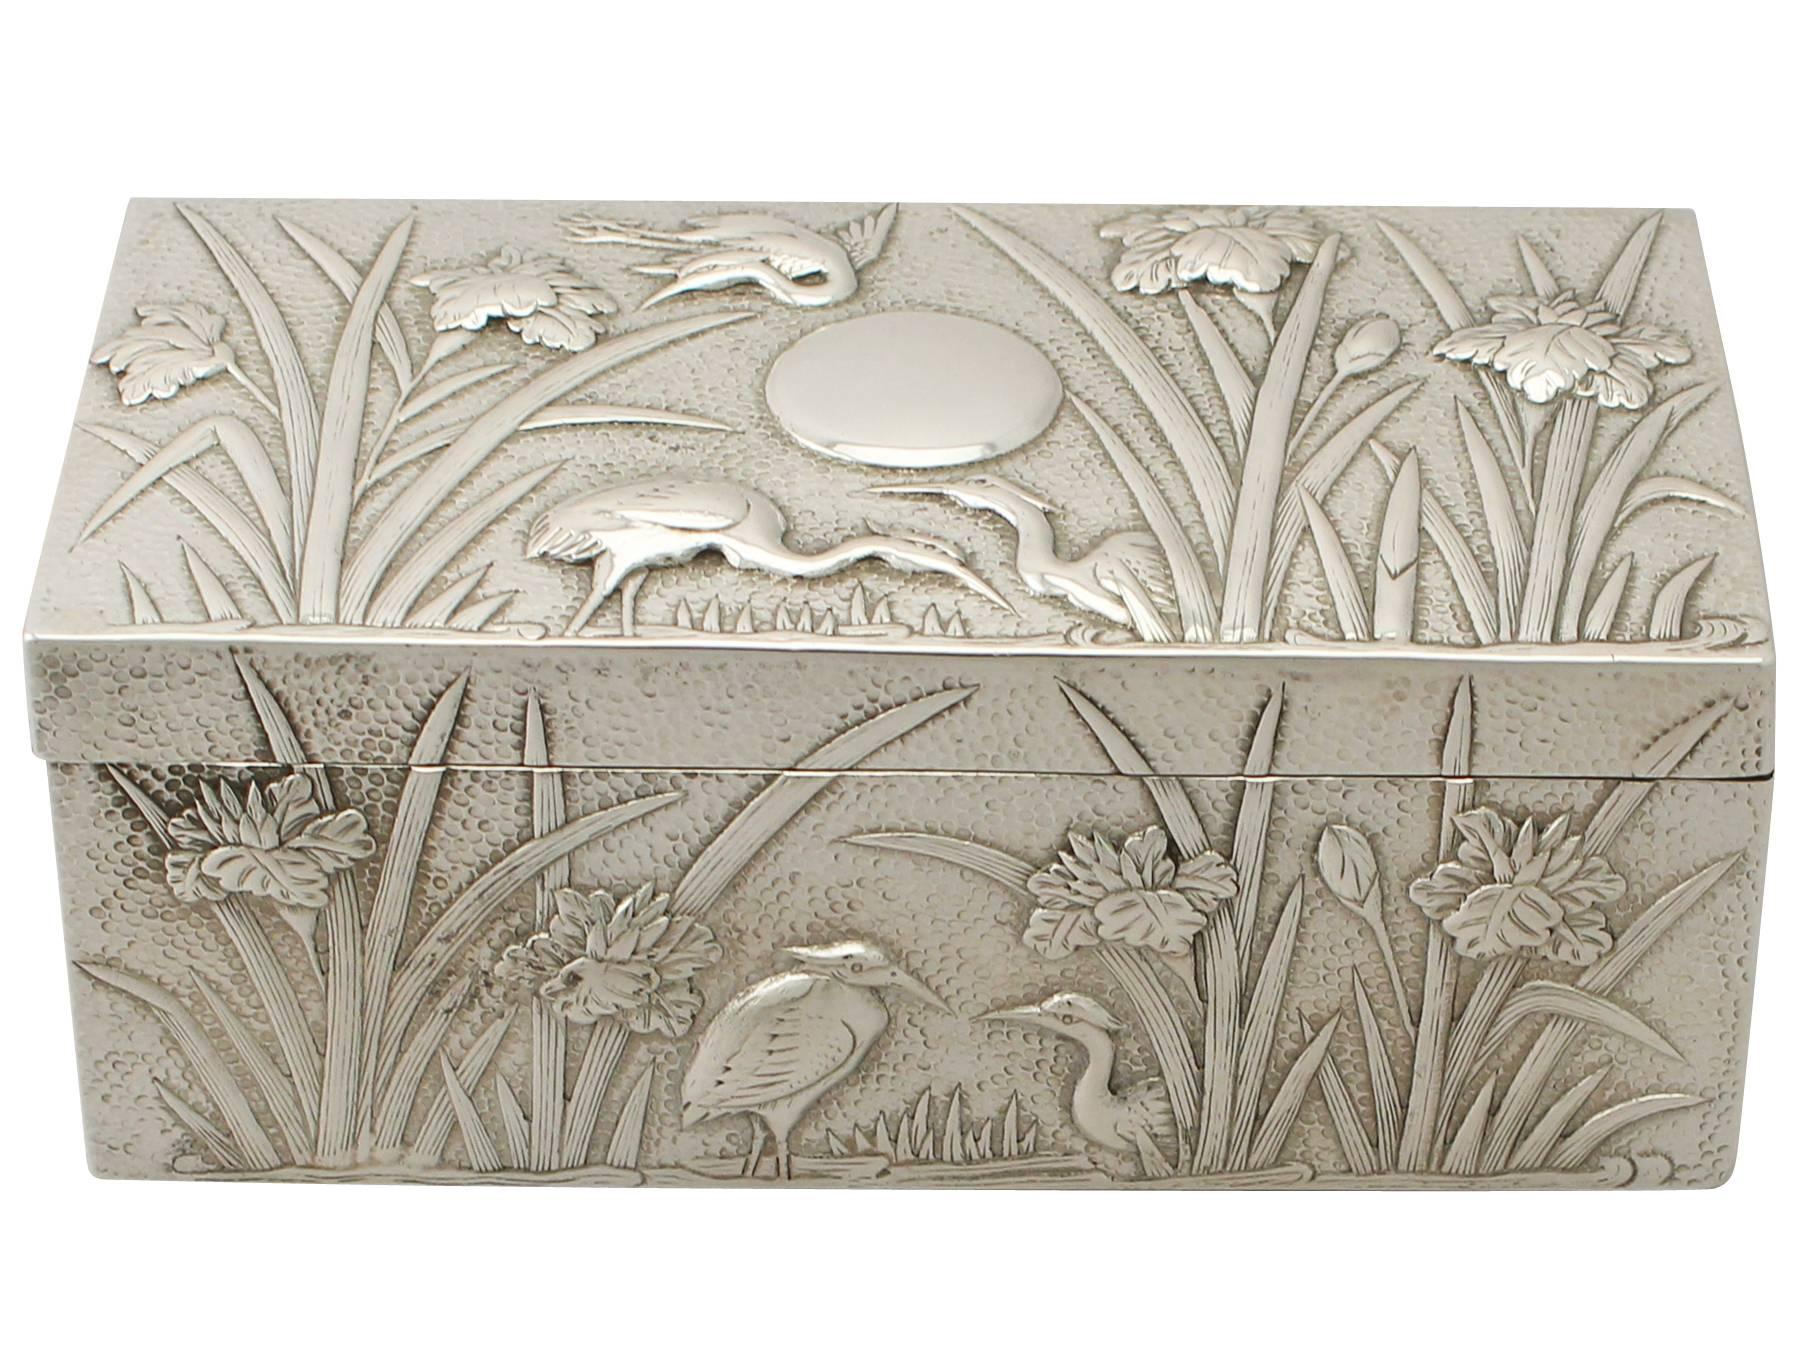 An exceptional, fine and impressive antique Chinese Export silver box; an addition to our oriental silver collection.

This exceptional antique Chinese Export Silver (CES) box has a rectangular form.

The surface of this Chinese box is